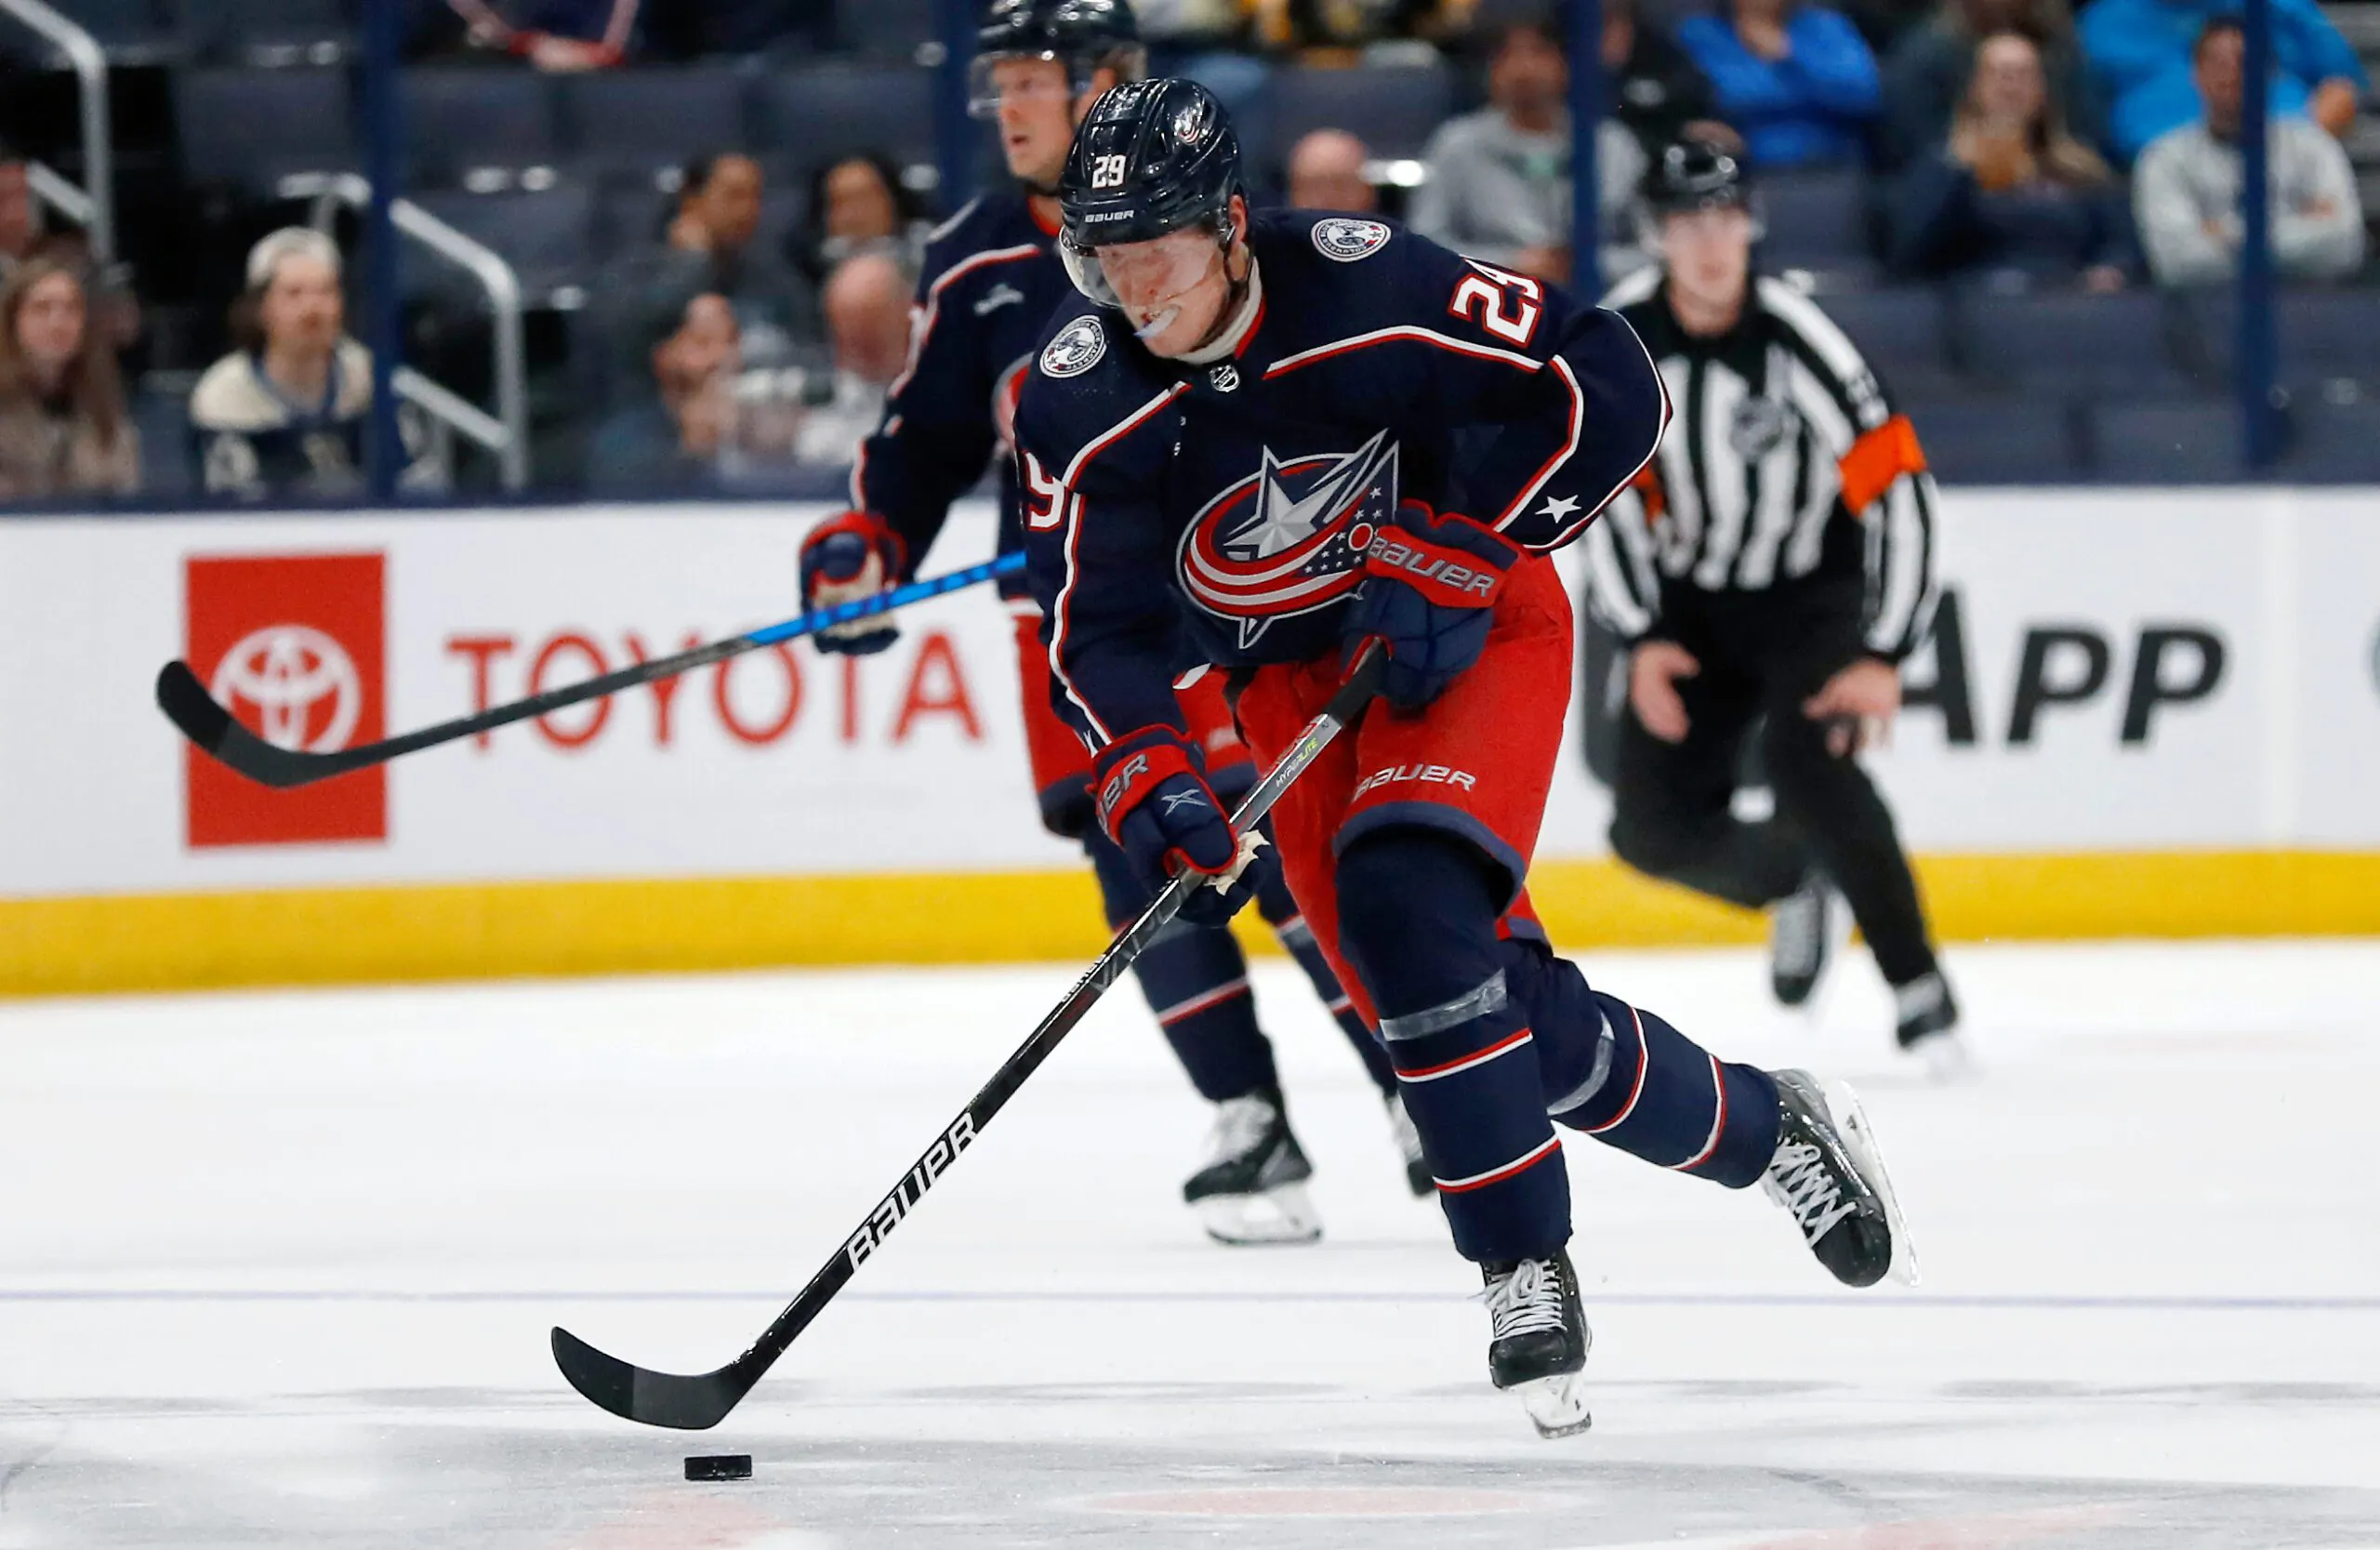 Columbus Blue Jackets activate Patrik Laine and Elvis Merzlikins from injured reserve ahead of Friday’s game